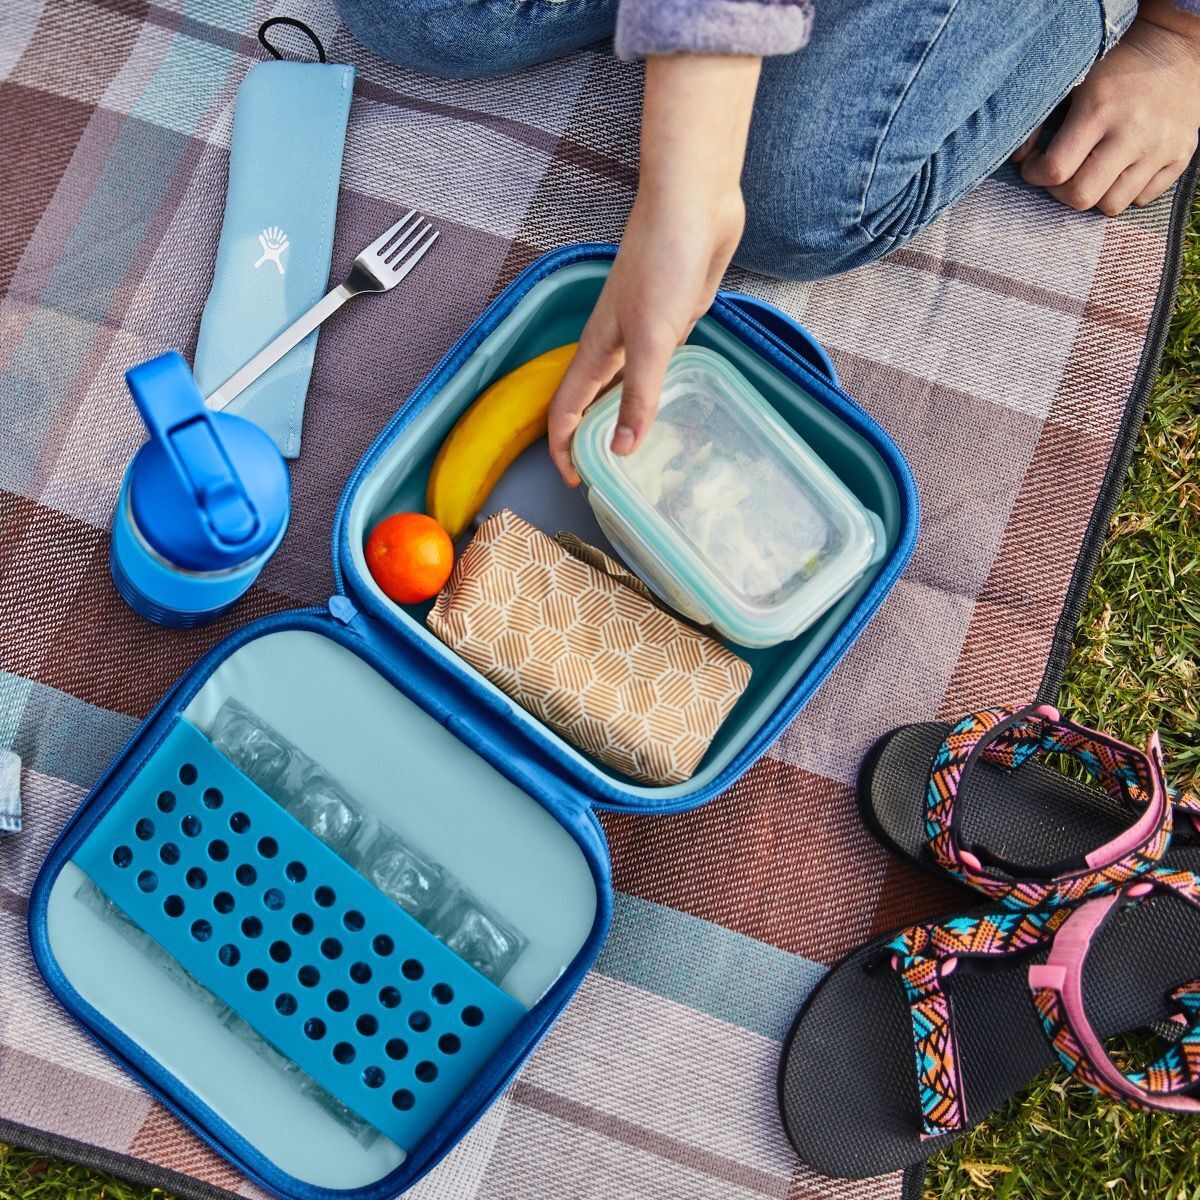 Hydro Flask Small Insulated Lunch Box - Kids' - Hike & Camp